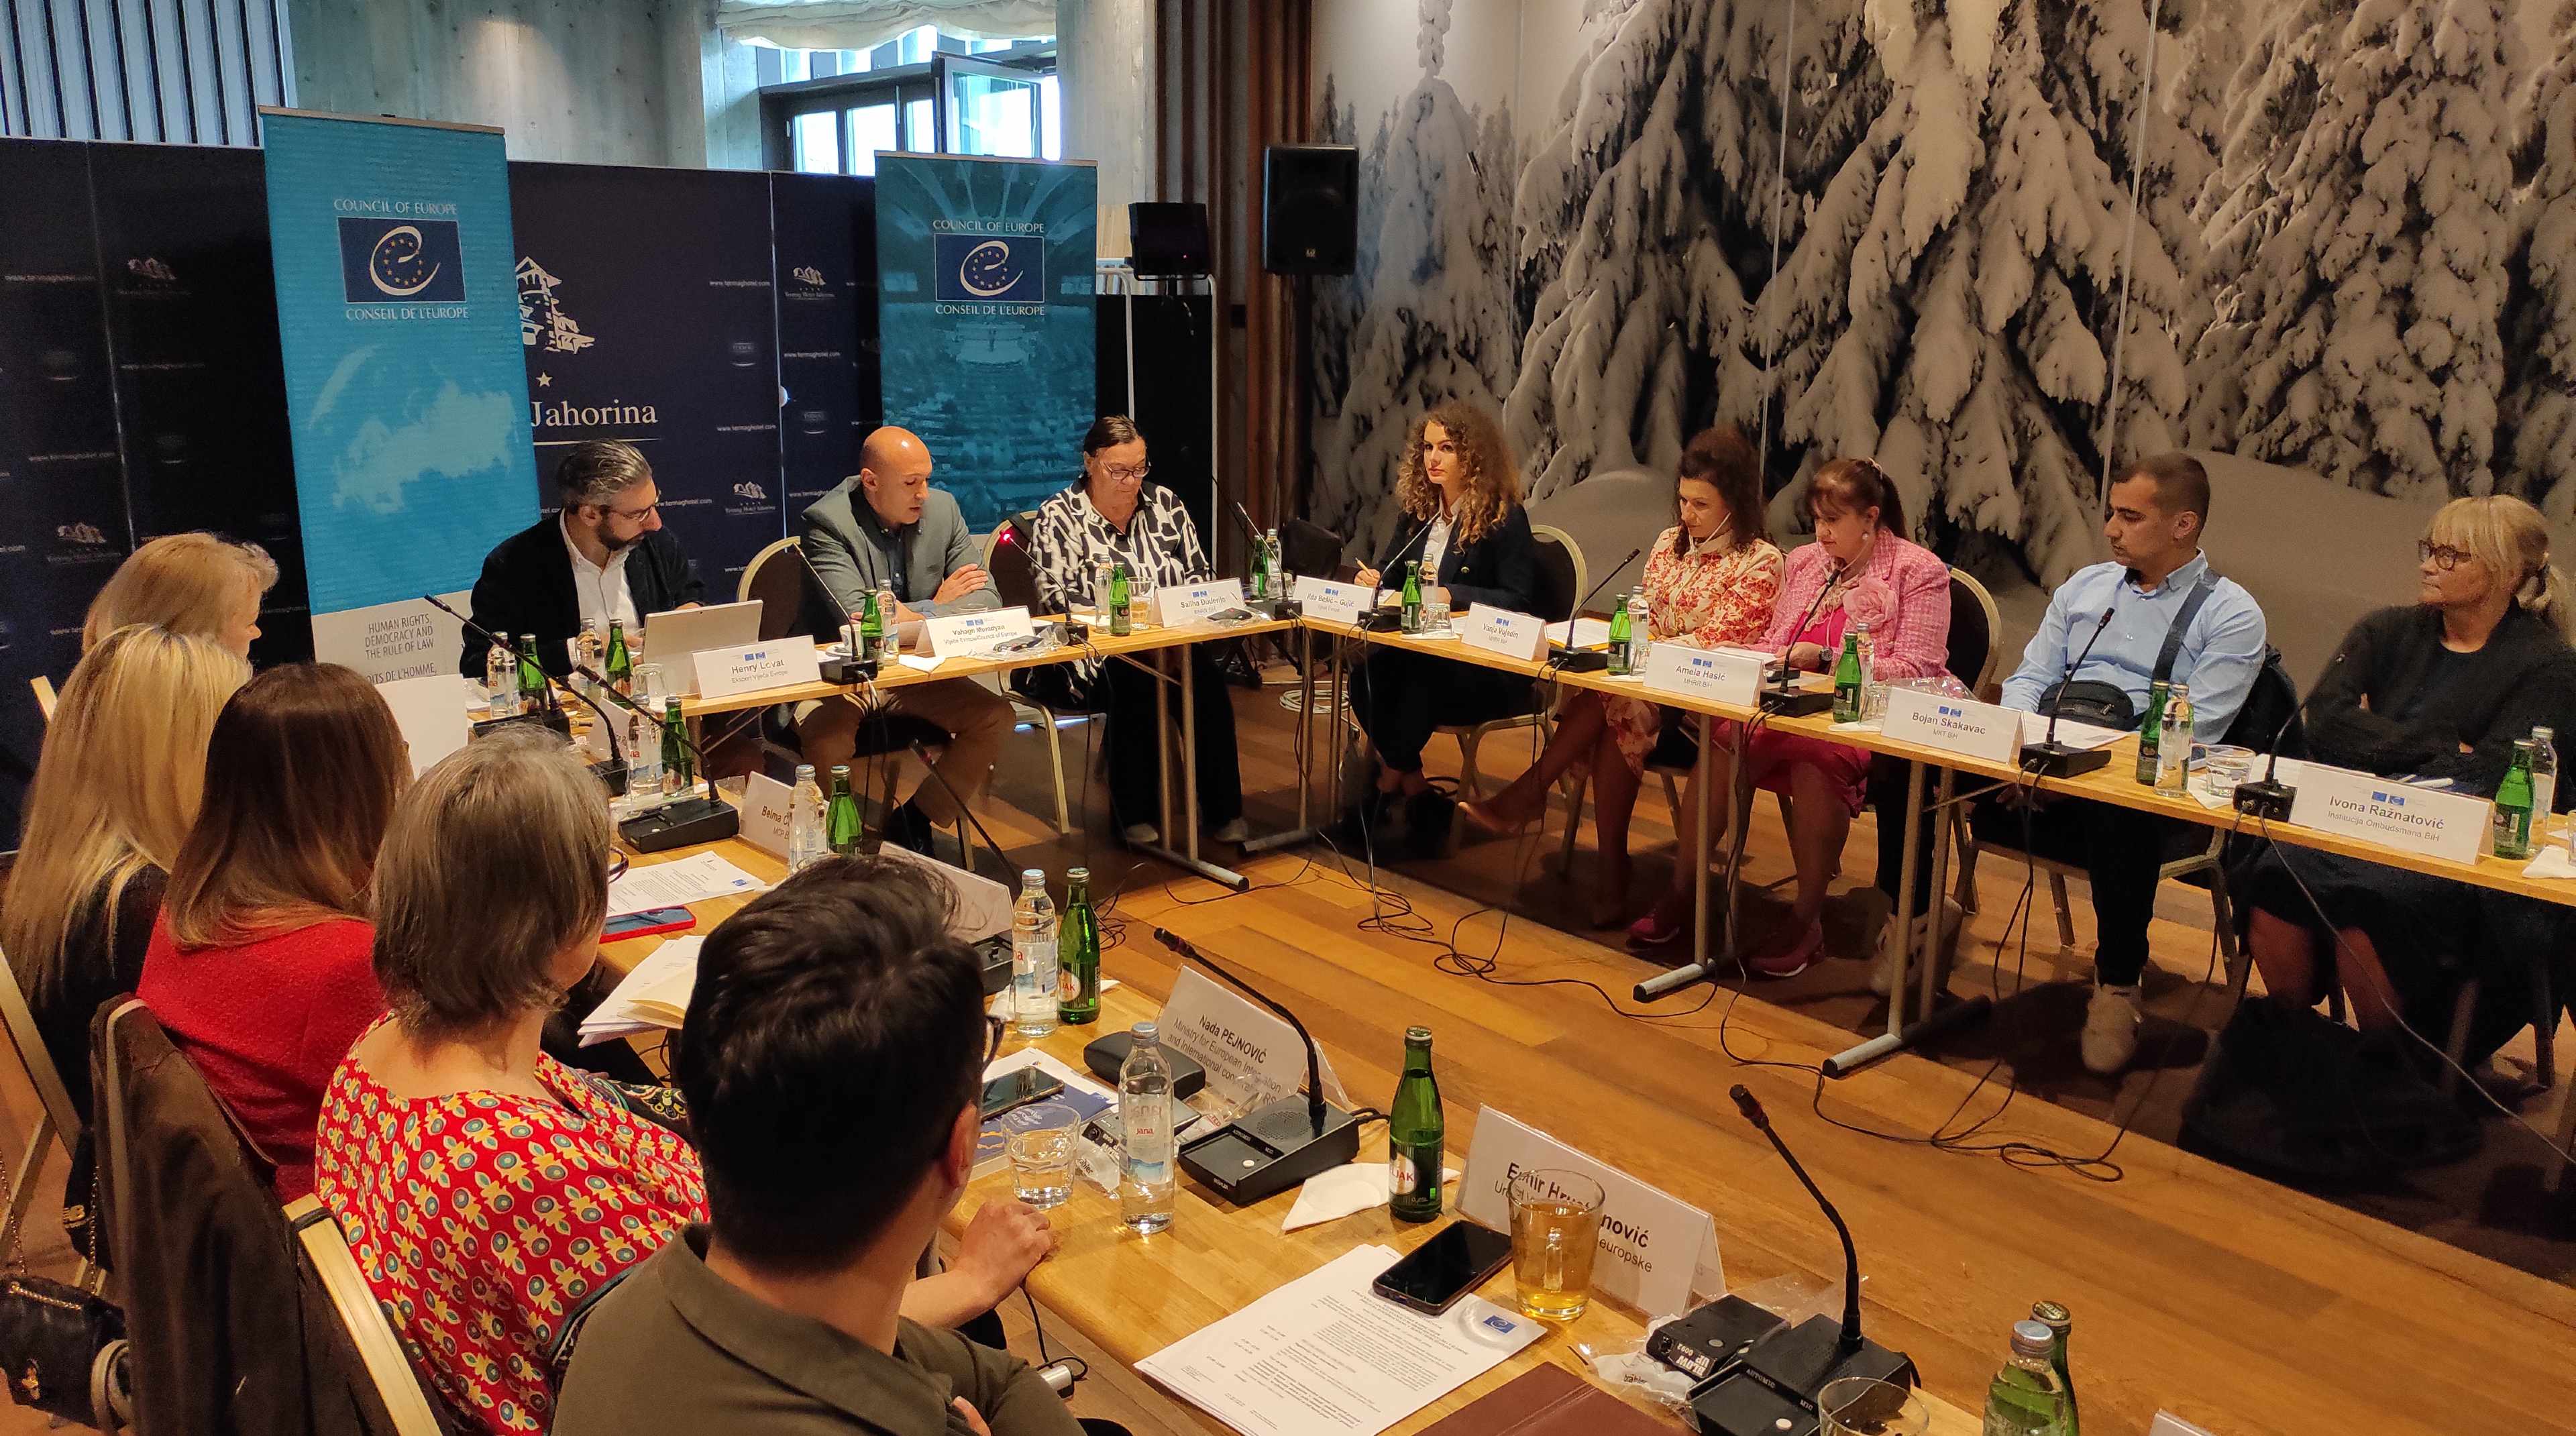 Inaugural meeting of the Working Group on monitoring and reporting on freedom of expression and freedom of information in Bosnia and Herzegovina